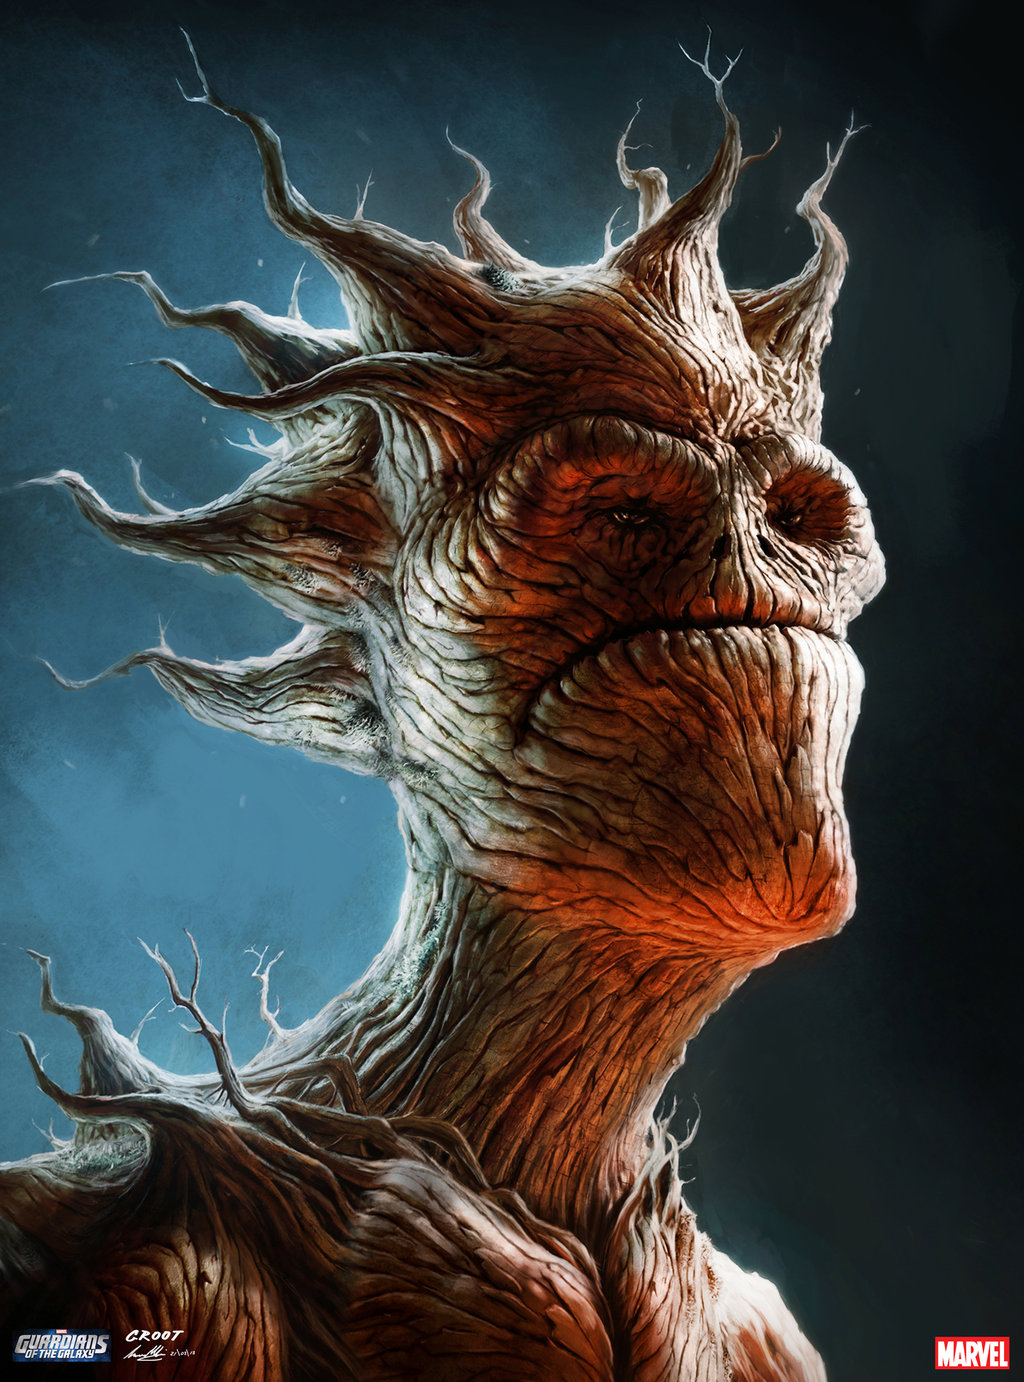 image of I AM GROOT.